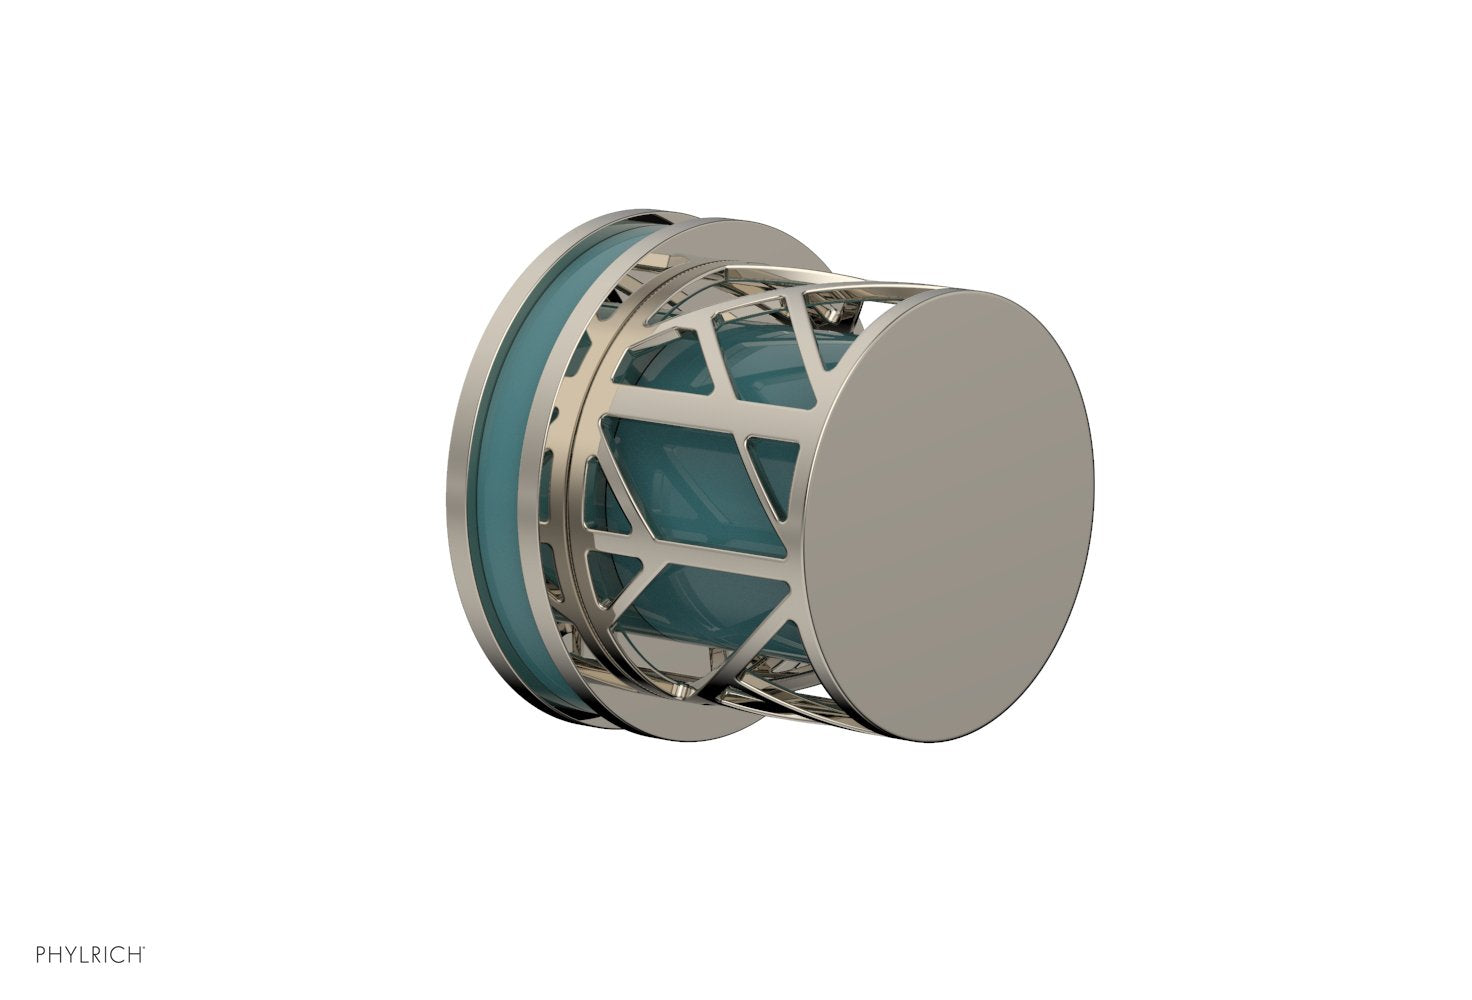 Phylrich JOLIE Volume Control/Diverter Trim - Round Handle with "Turquoise" Accents